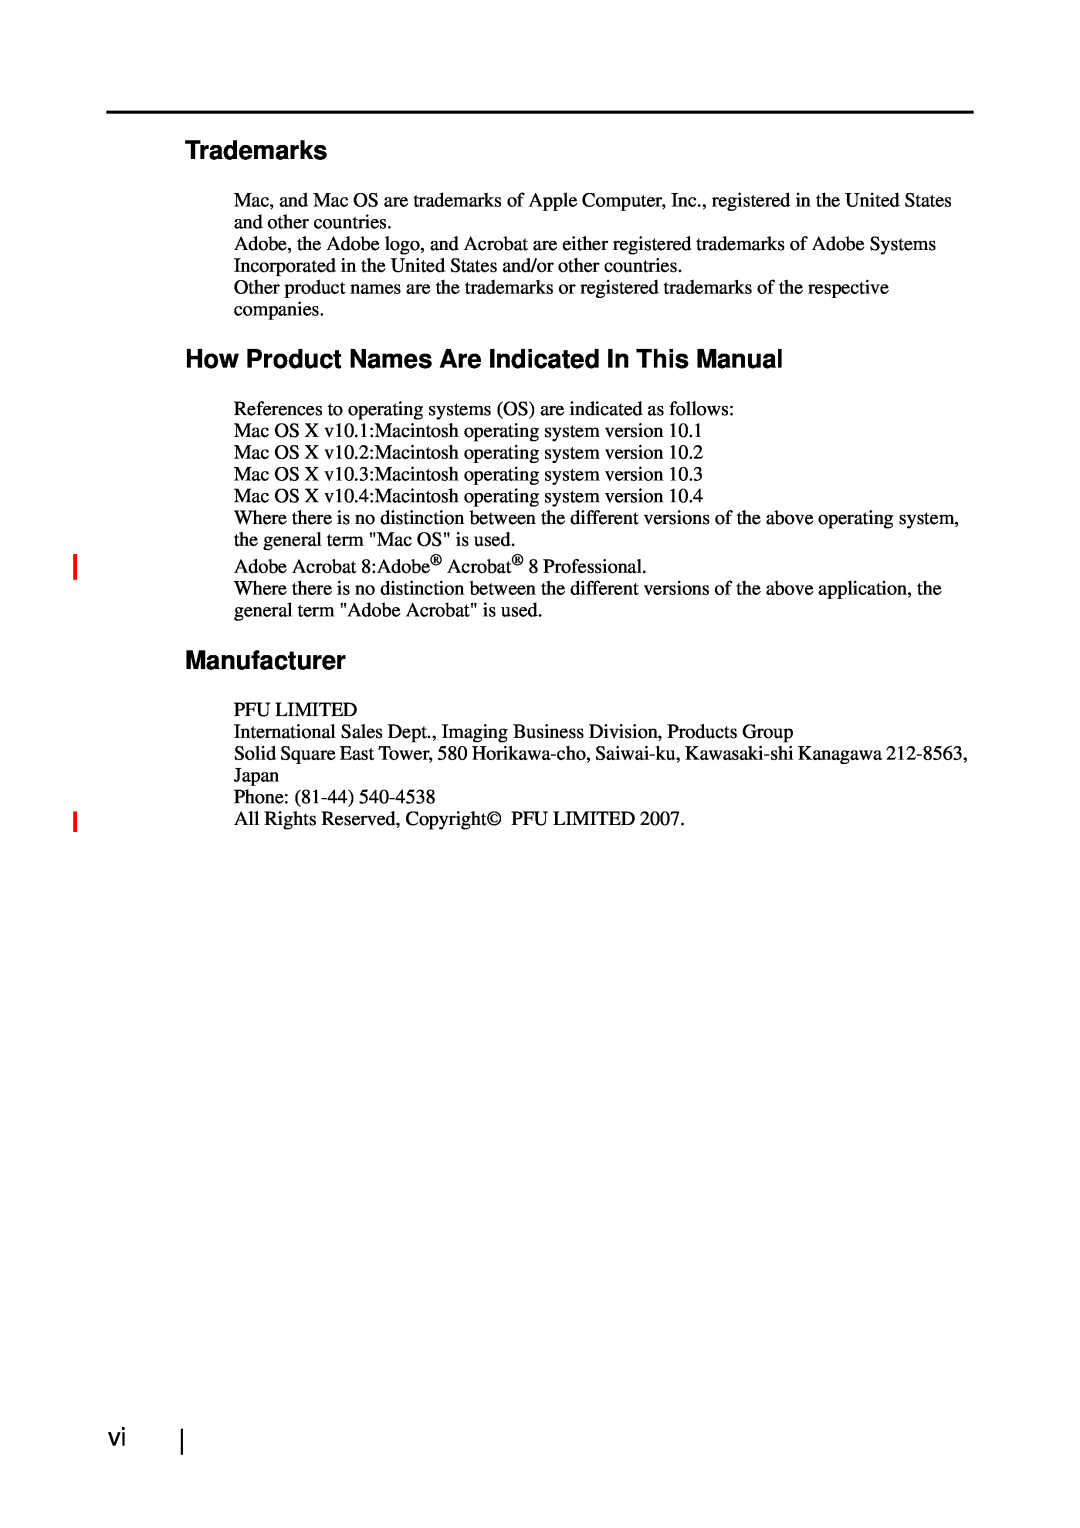 Fujitsu S510M manual Trademarks, How Product Names Are Indicated In This Manual, Manufacturer 